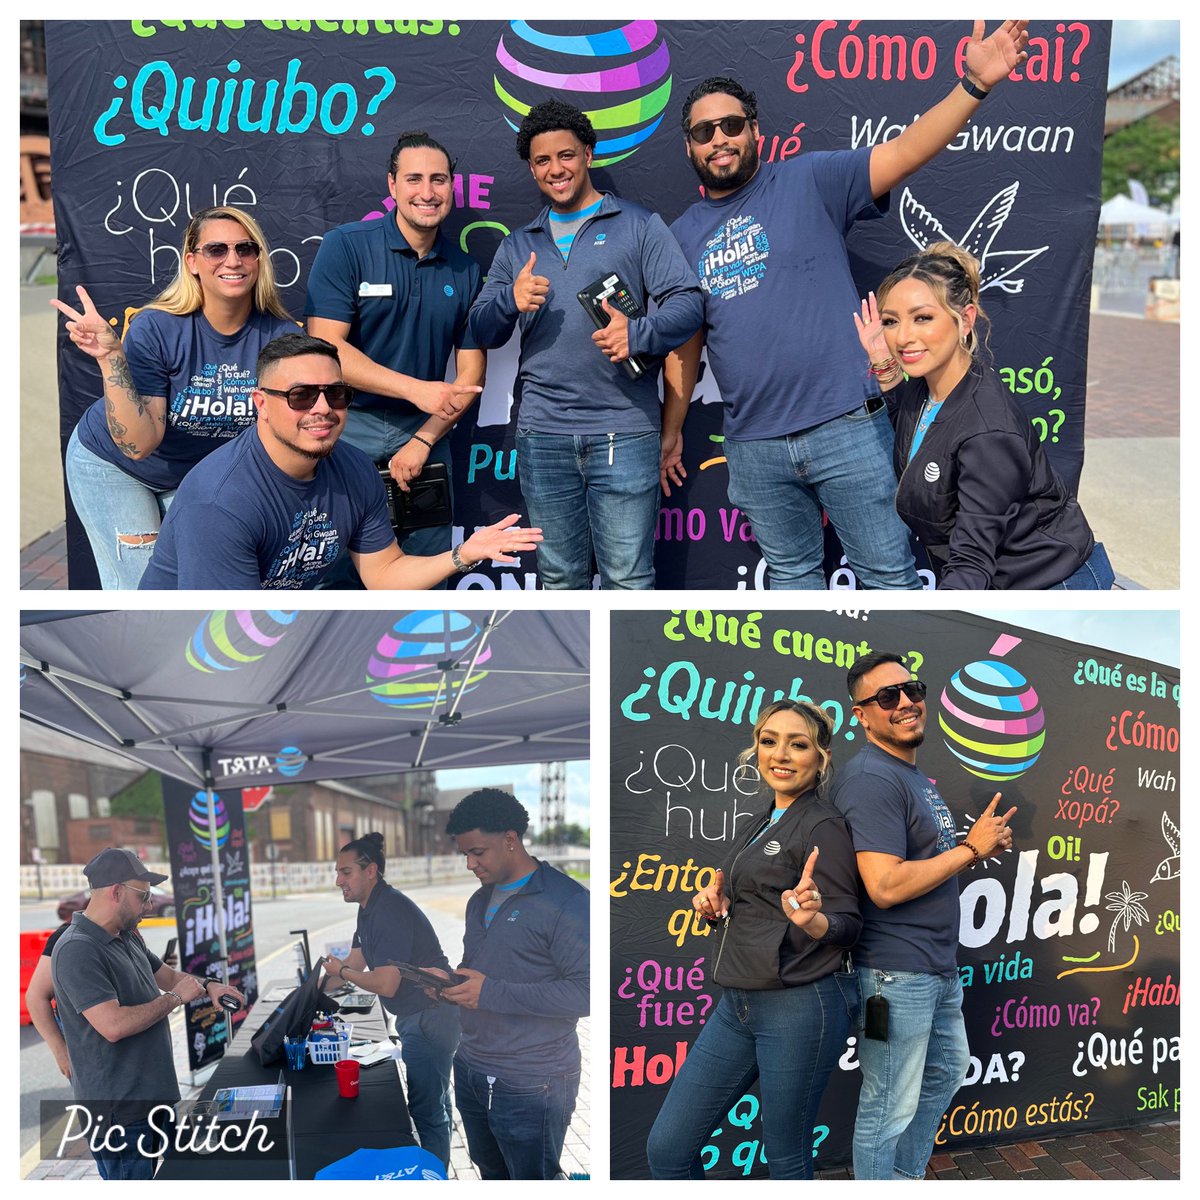 The OHPA conexión coalition was getting scrappy in the neighborhood this weekend 💪🏽 Sabor Latino Fest was the successful start to an event packed summer in the community 🚀 #HACEMOS @keroninc @OHPAunstOHPAble @KDeSantiago5 @conexioncoalit1 @team_oselett @MikeSBurgess_ @illy_ills